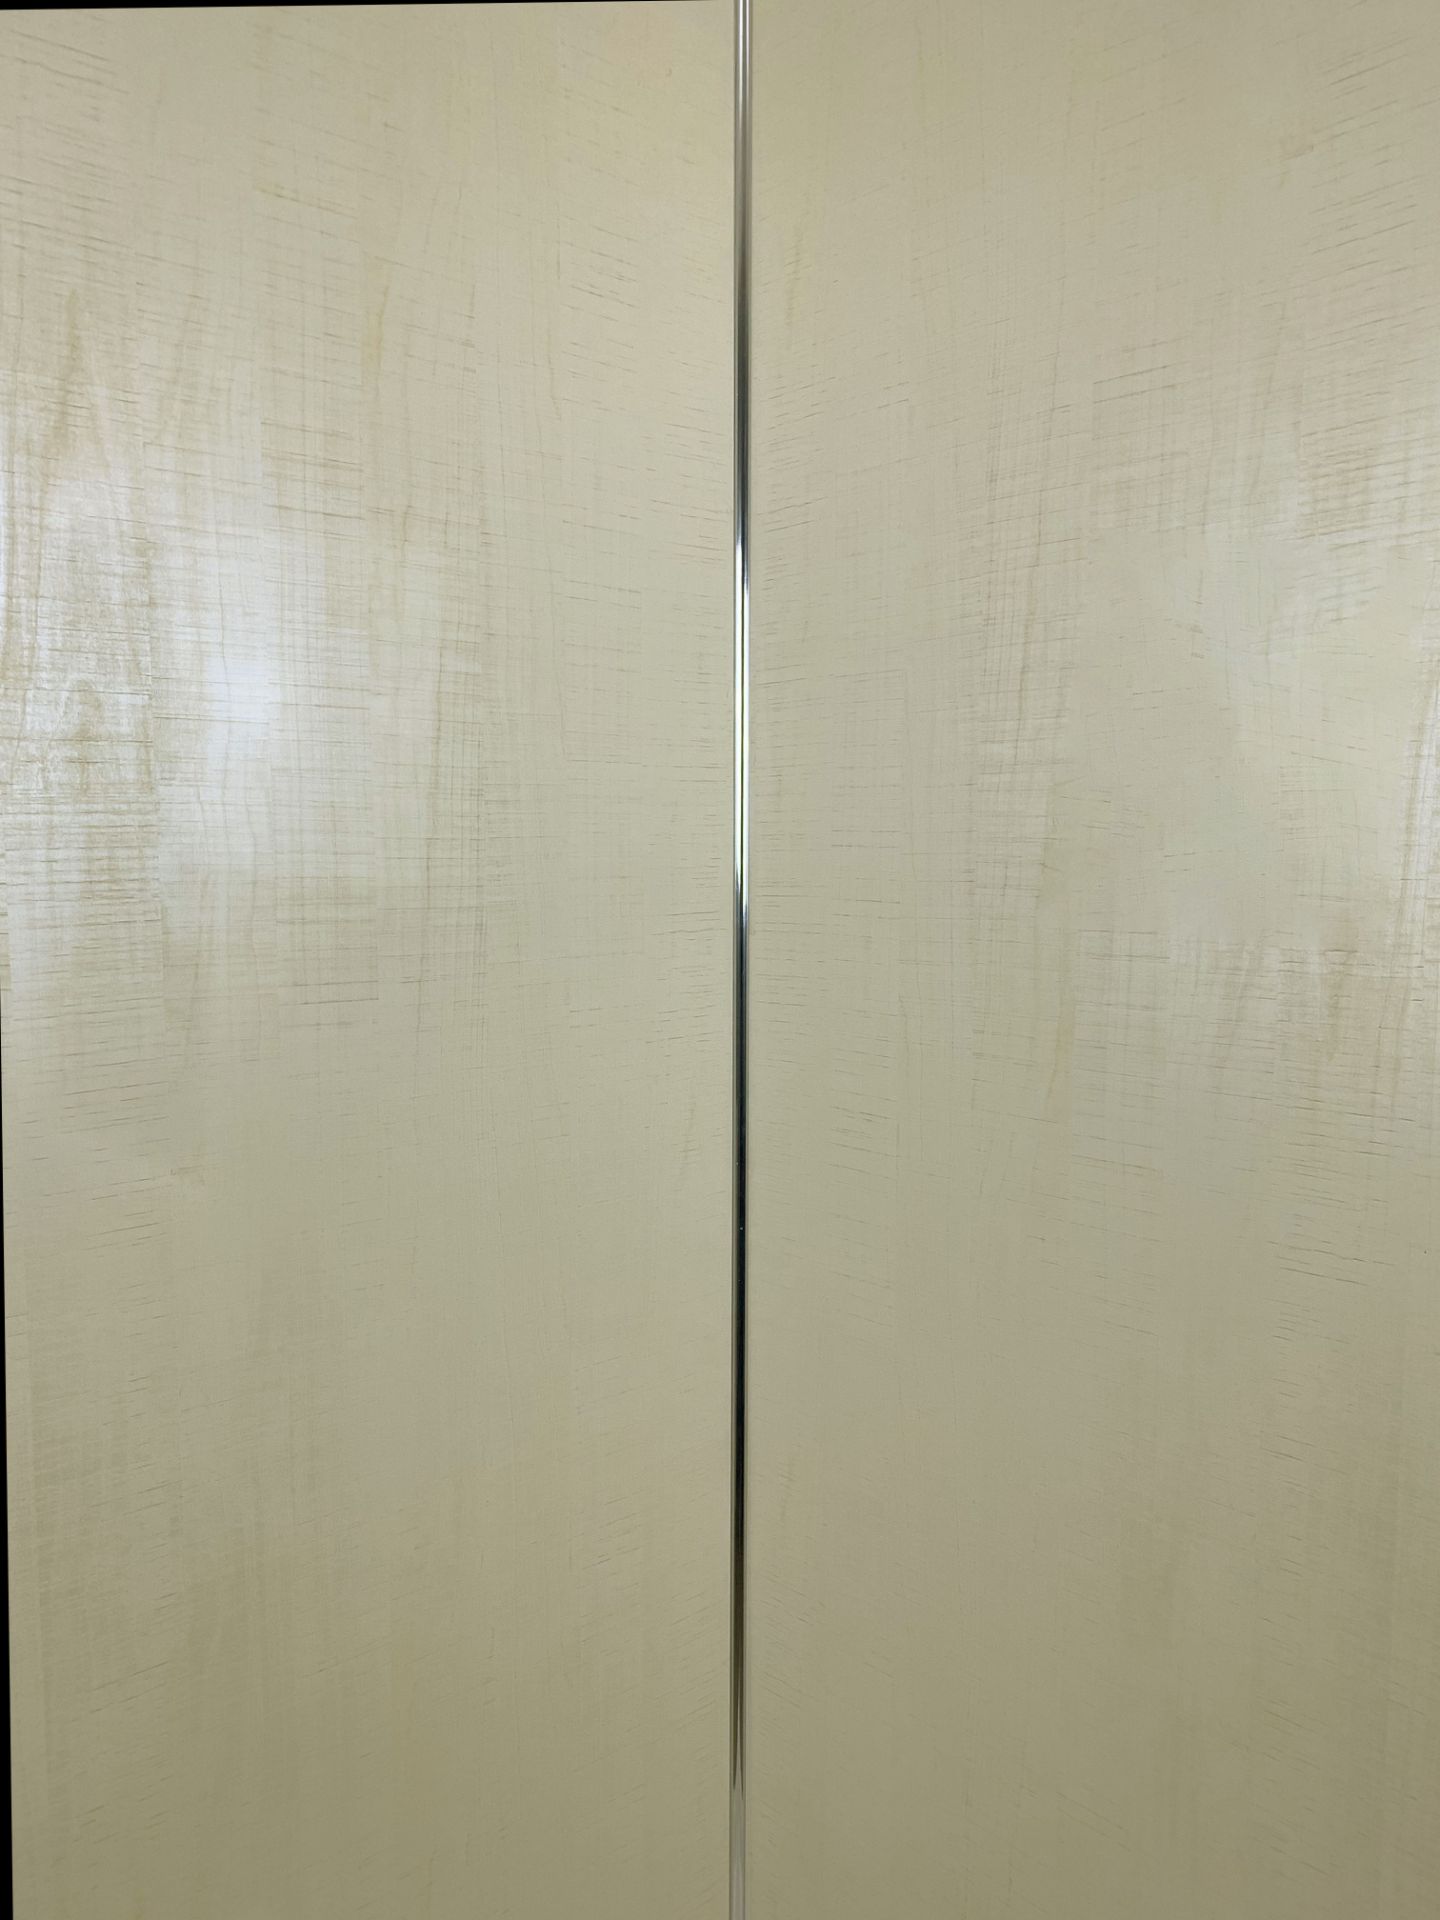 Bathroom Wall PVC Cladding Shower Panels 100% Waterpoof 1m x 2.4m -100 Panels - Image 5 of 9